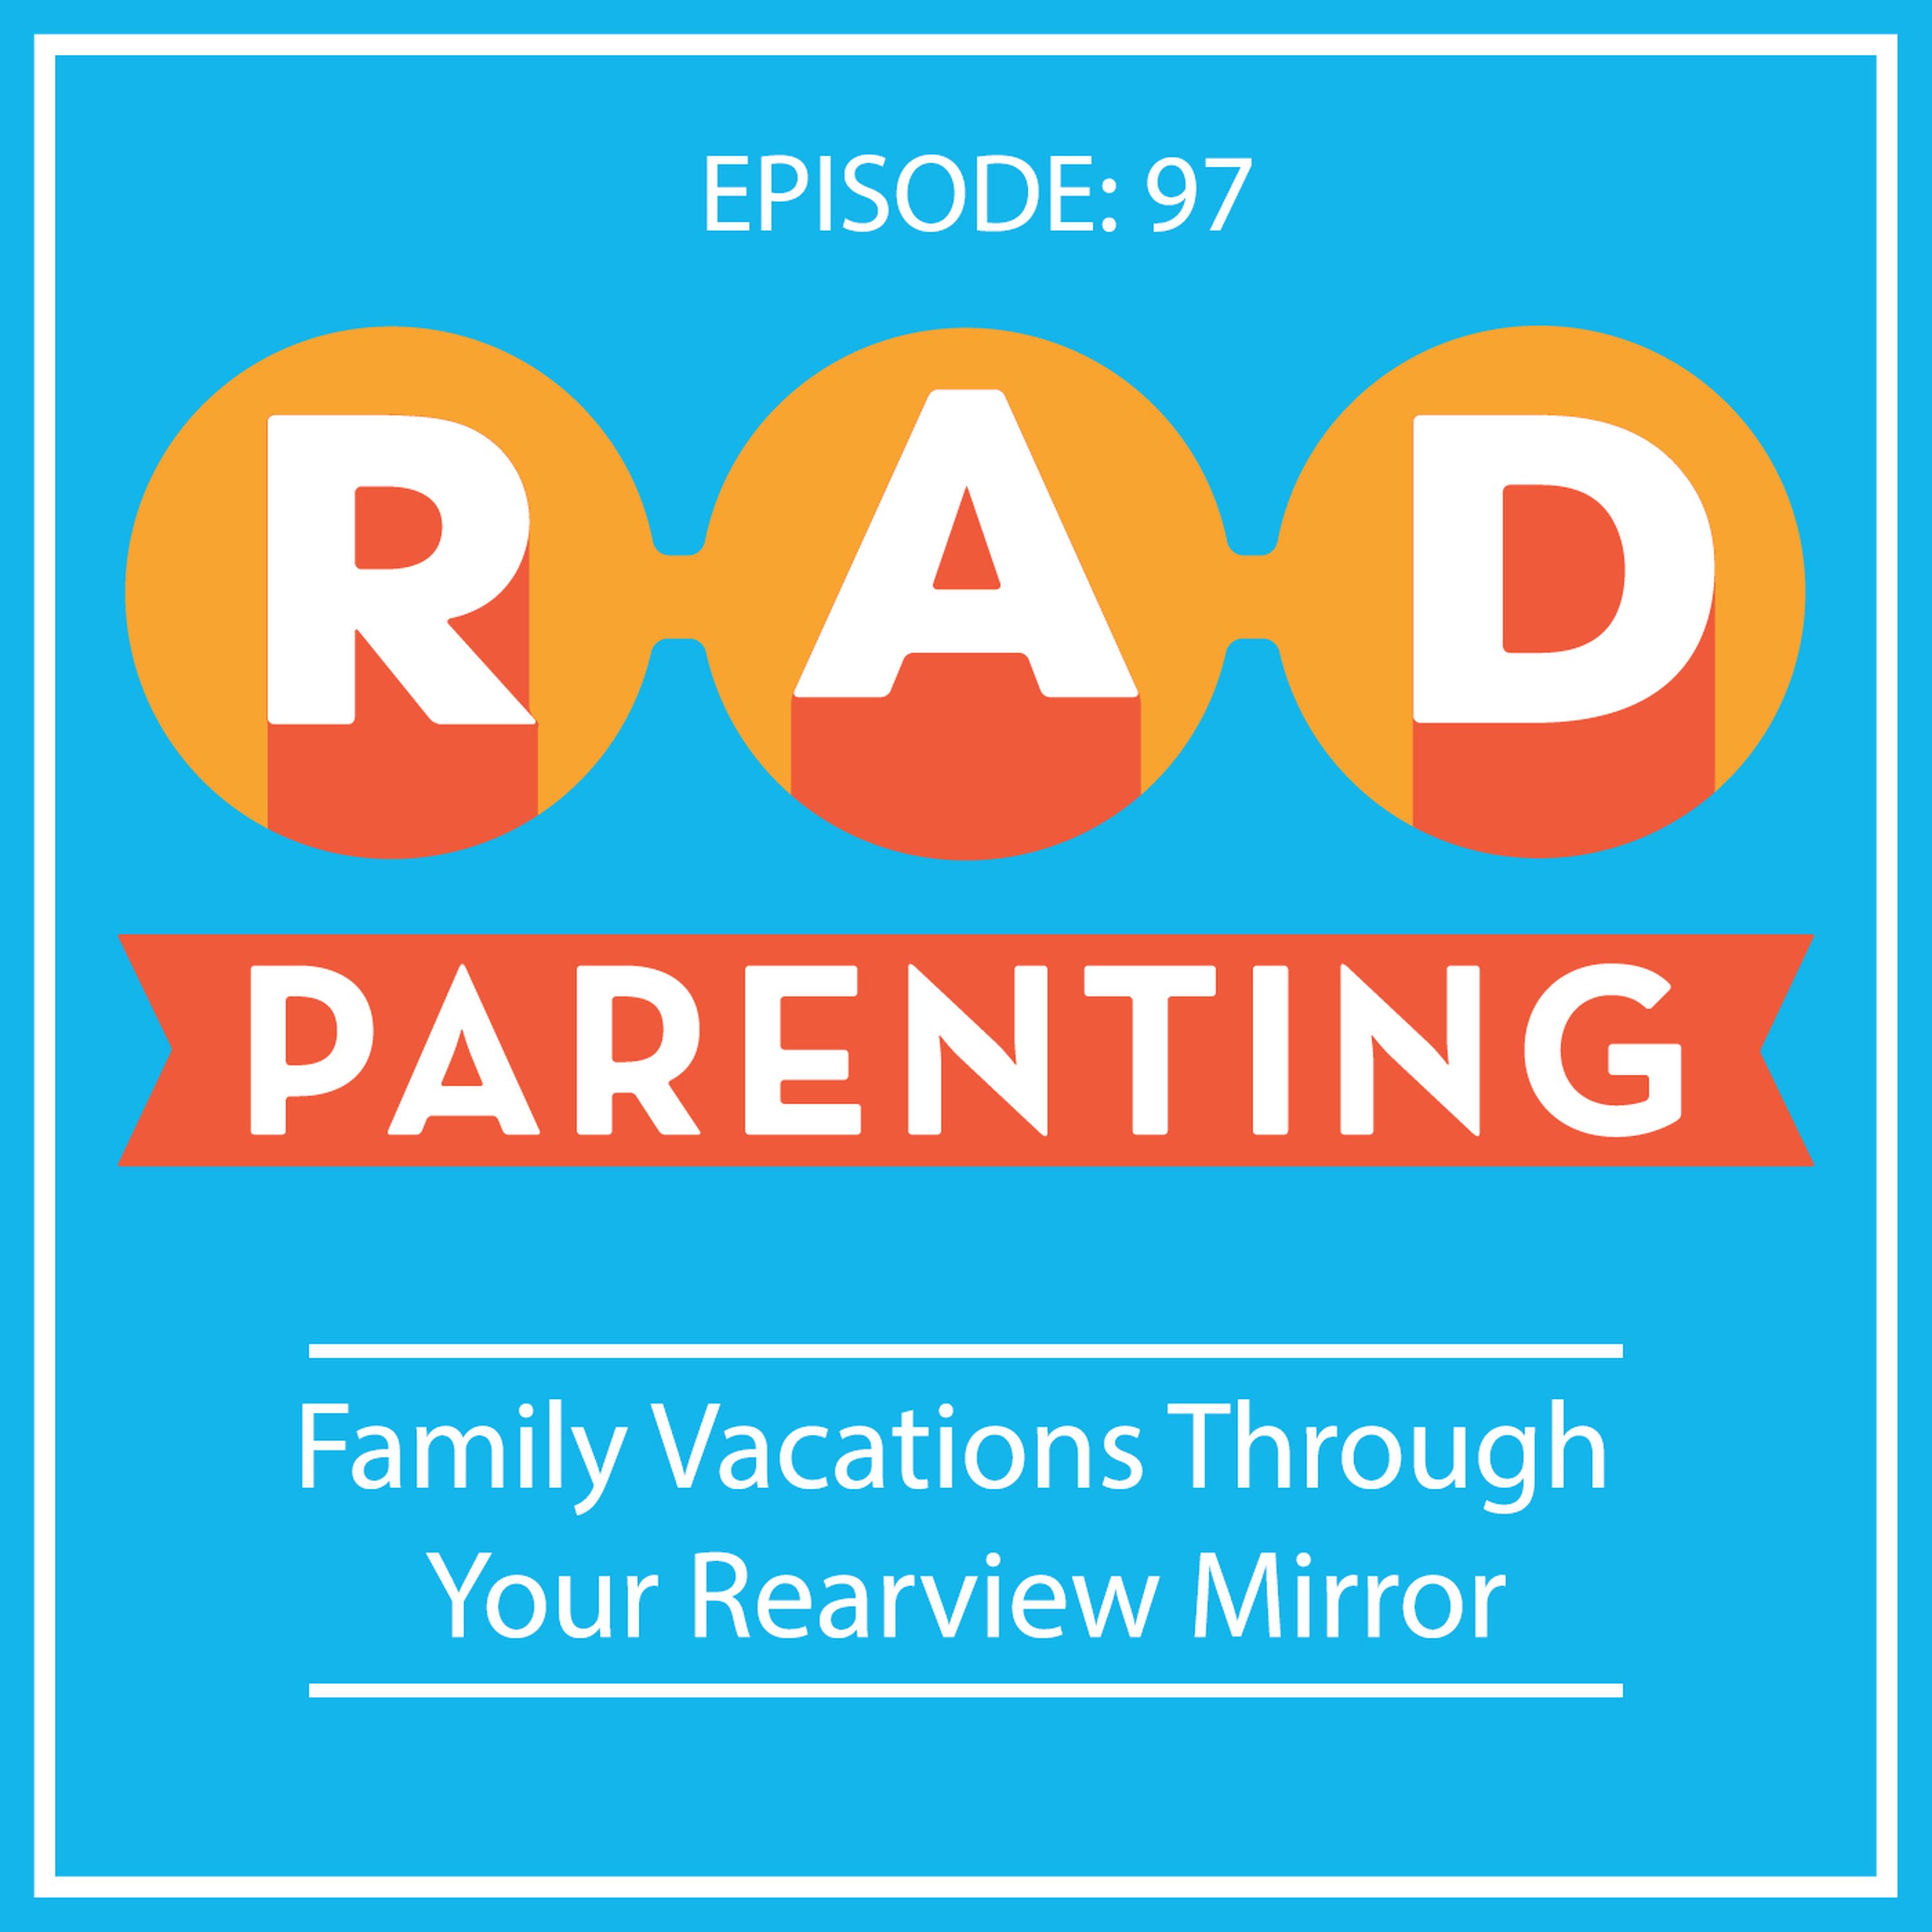 Family Vacations Through Your Rearview Mirror